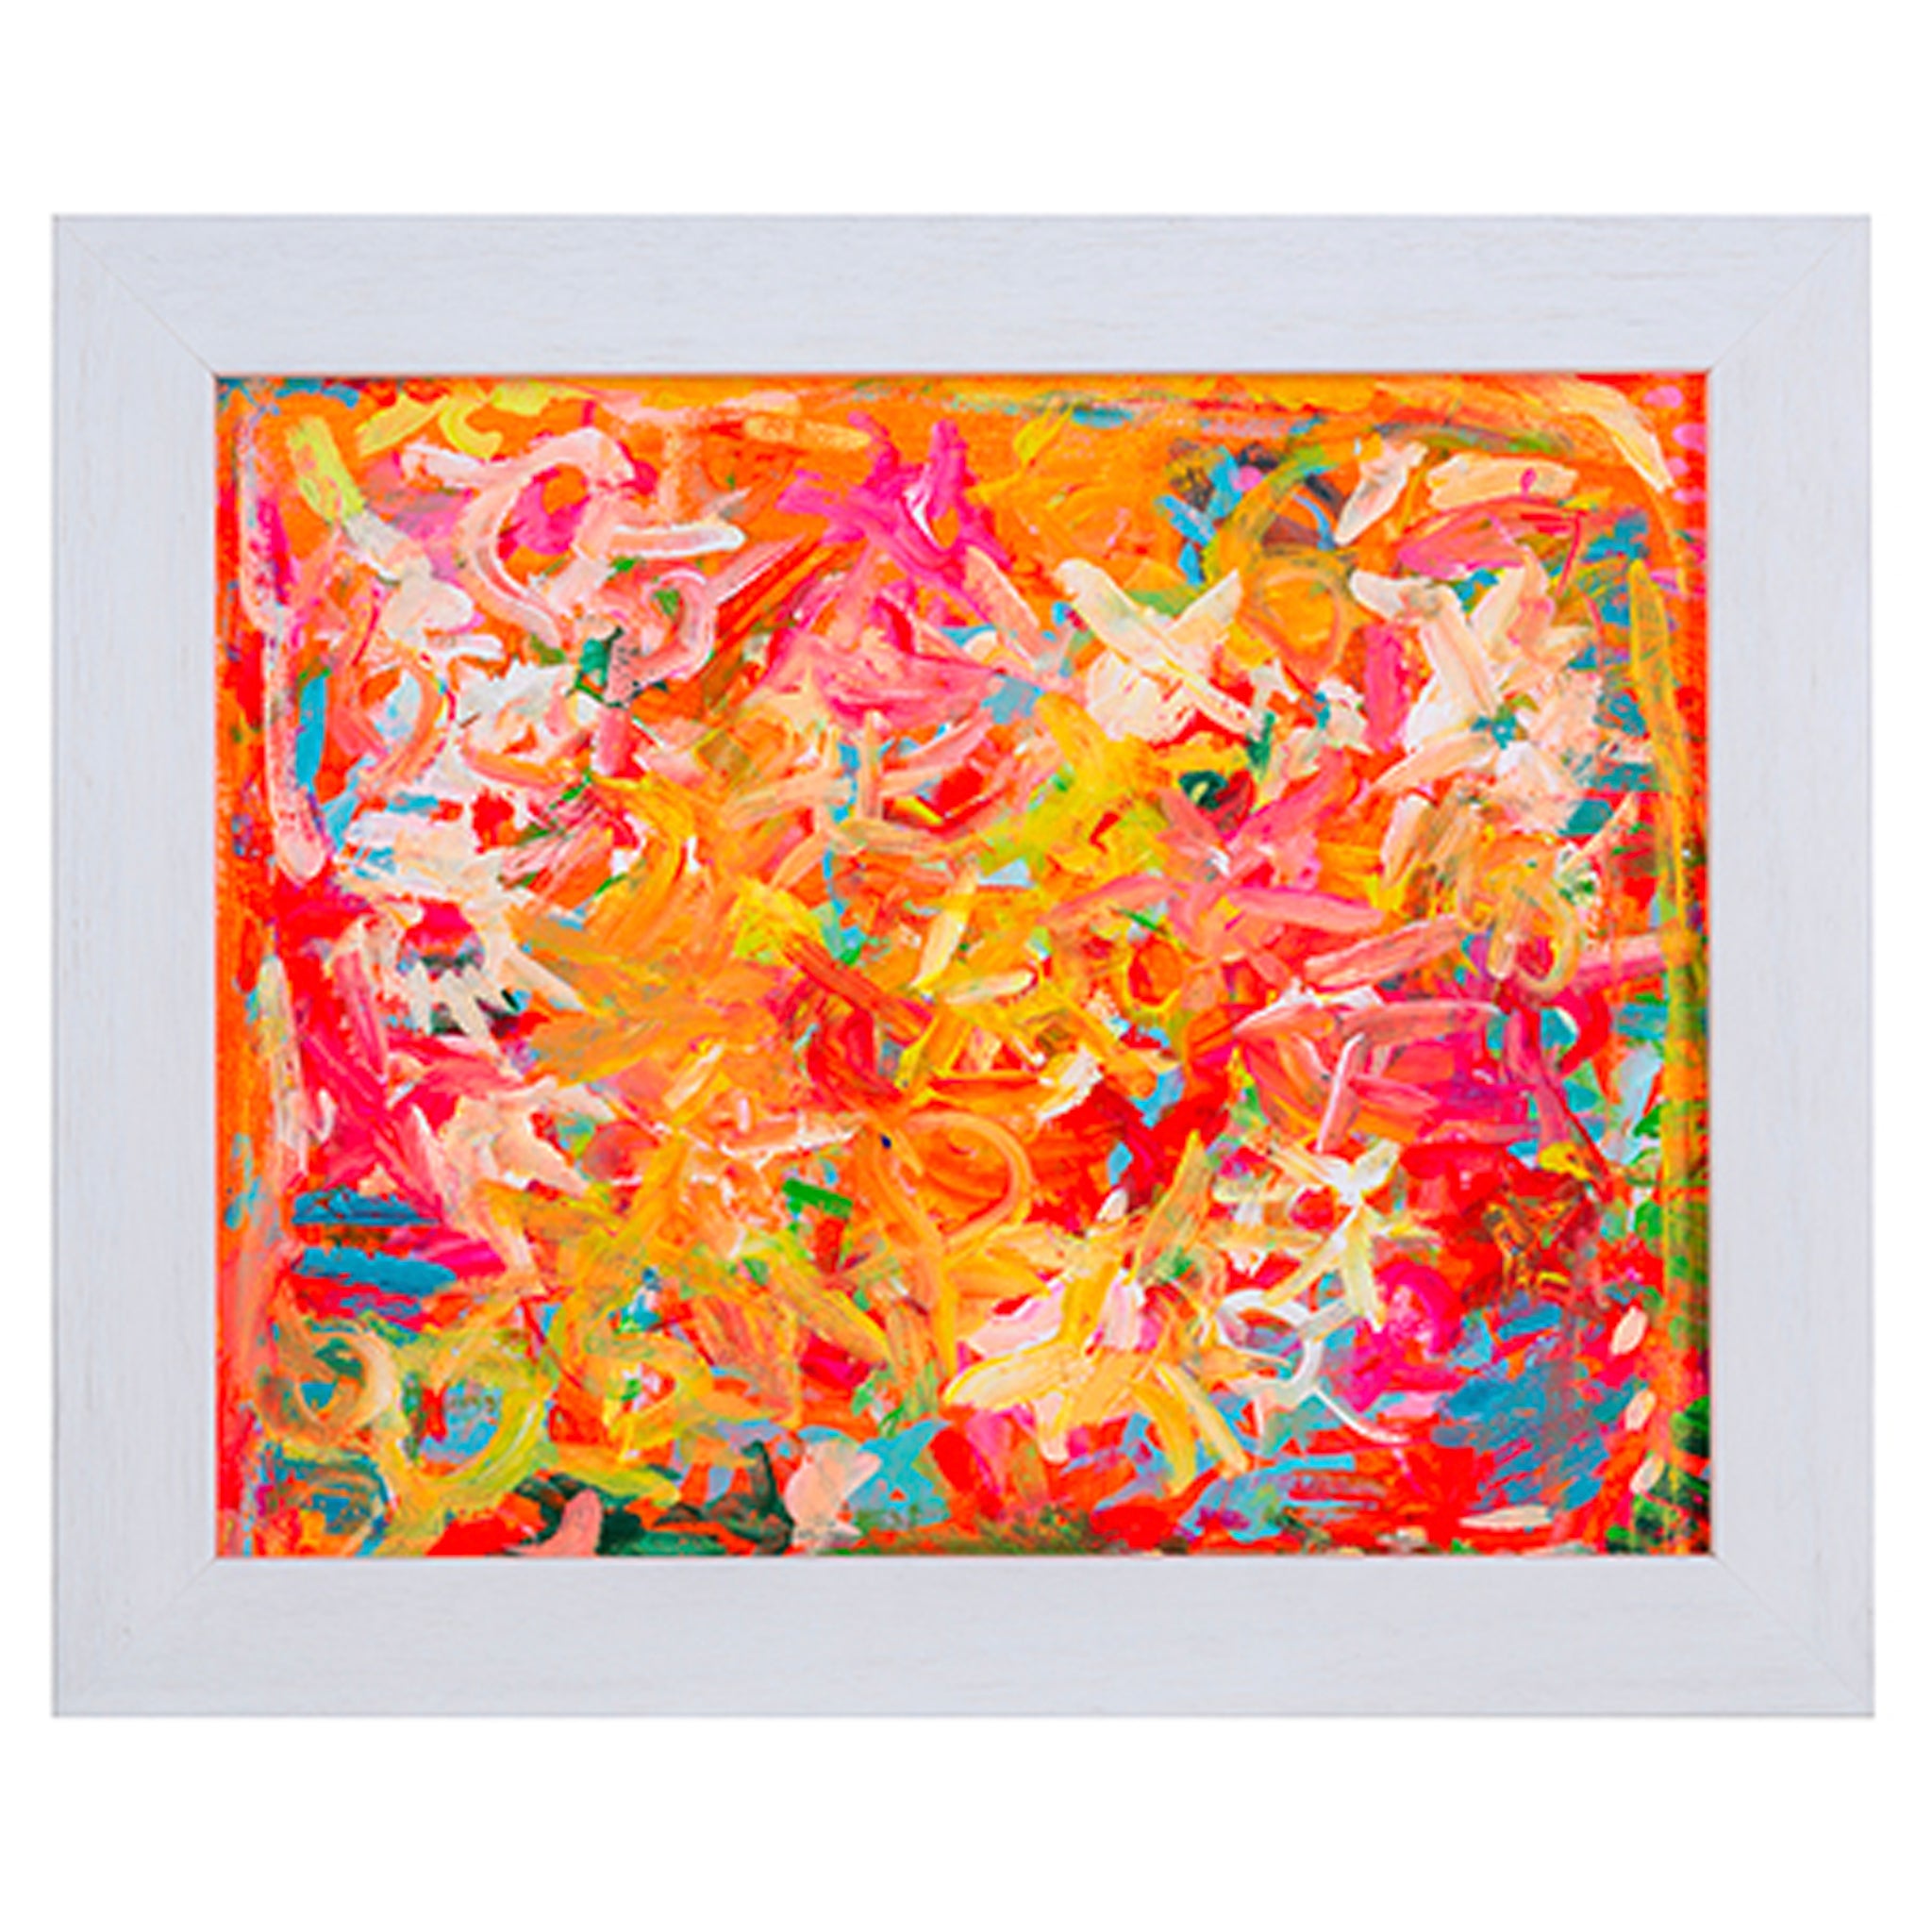 Framed bright coloured abstract painting called Summer Glow